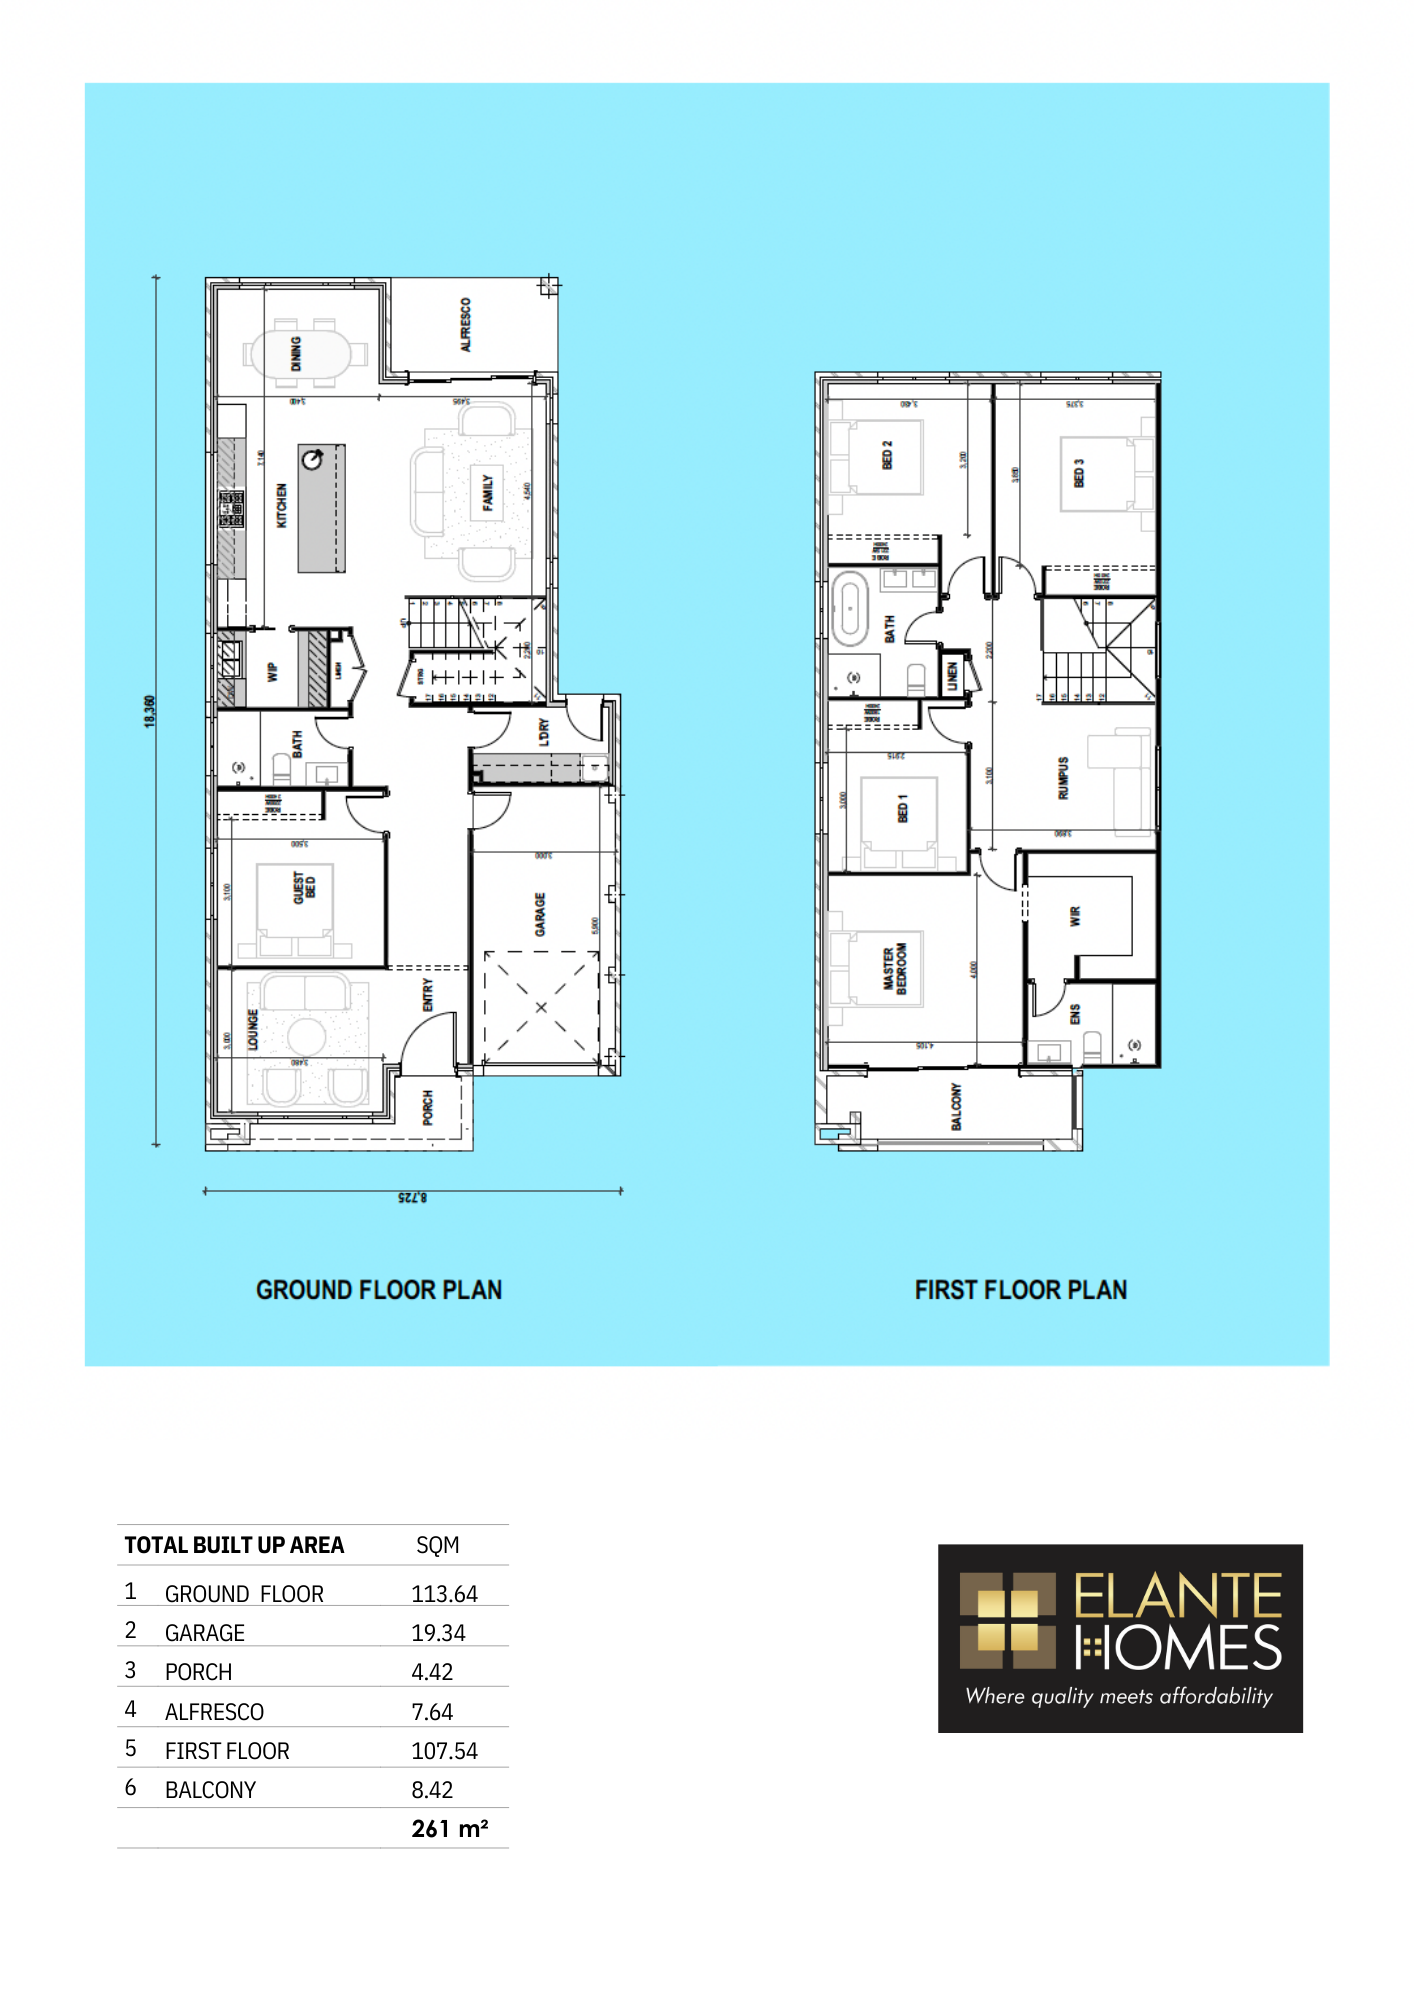 Floor plan of a 5 bedroom home for Zeta St, Box Hill by Elante Homes